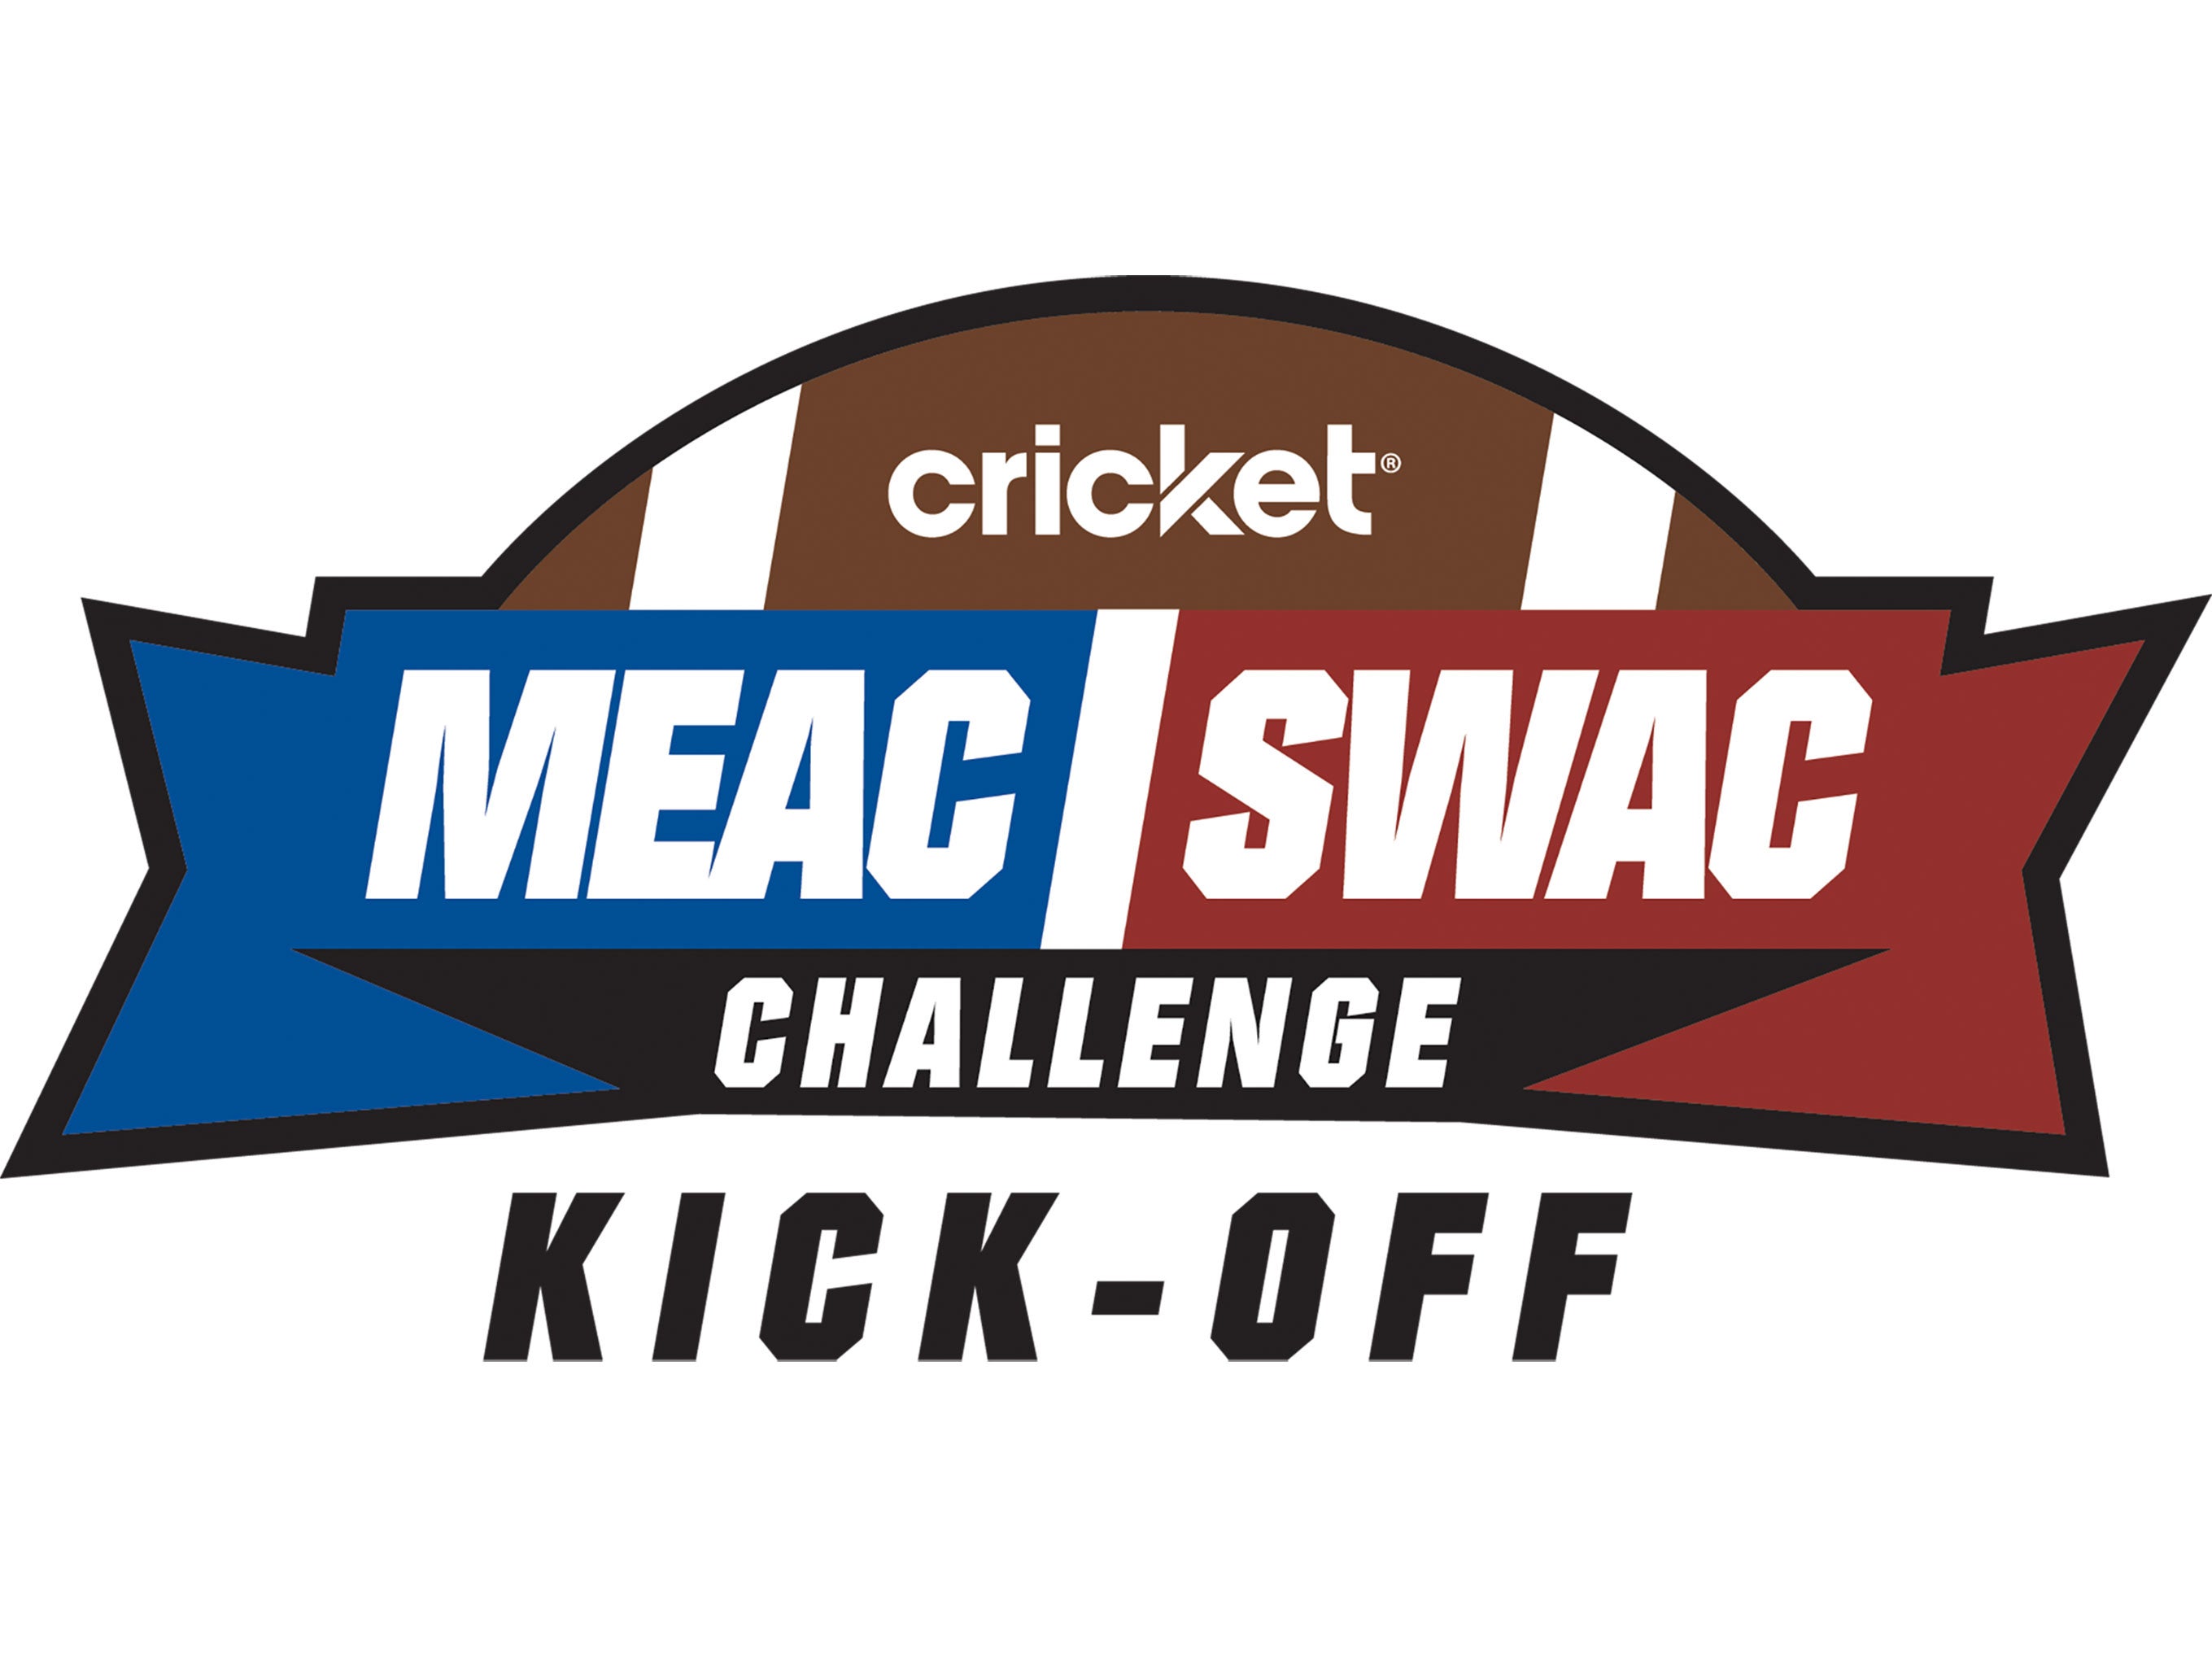 Cricket MEAC/SWAC Challenge Florida A&M Rattlers v Norfolk St Spartans in Atlanta promo photo for MEAC / SWAC Subscribers presale offer code